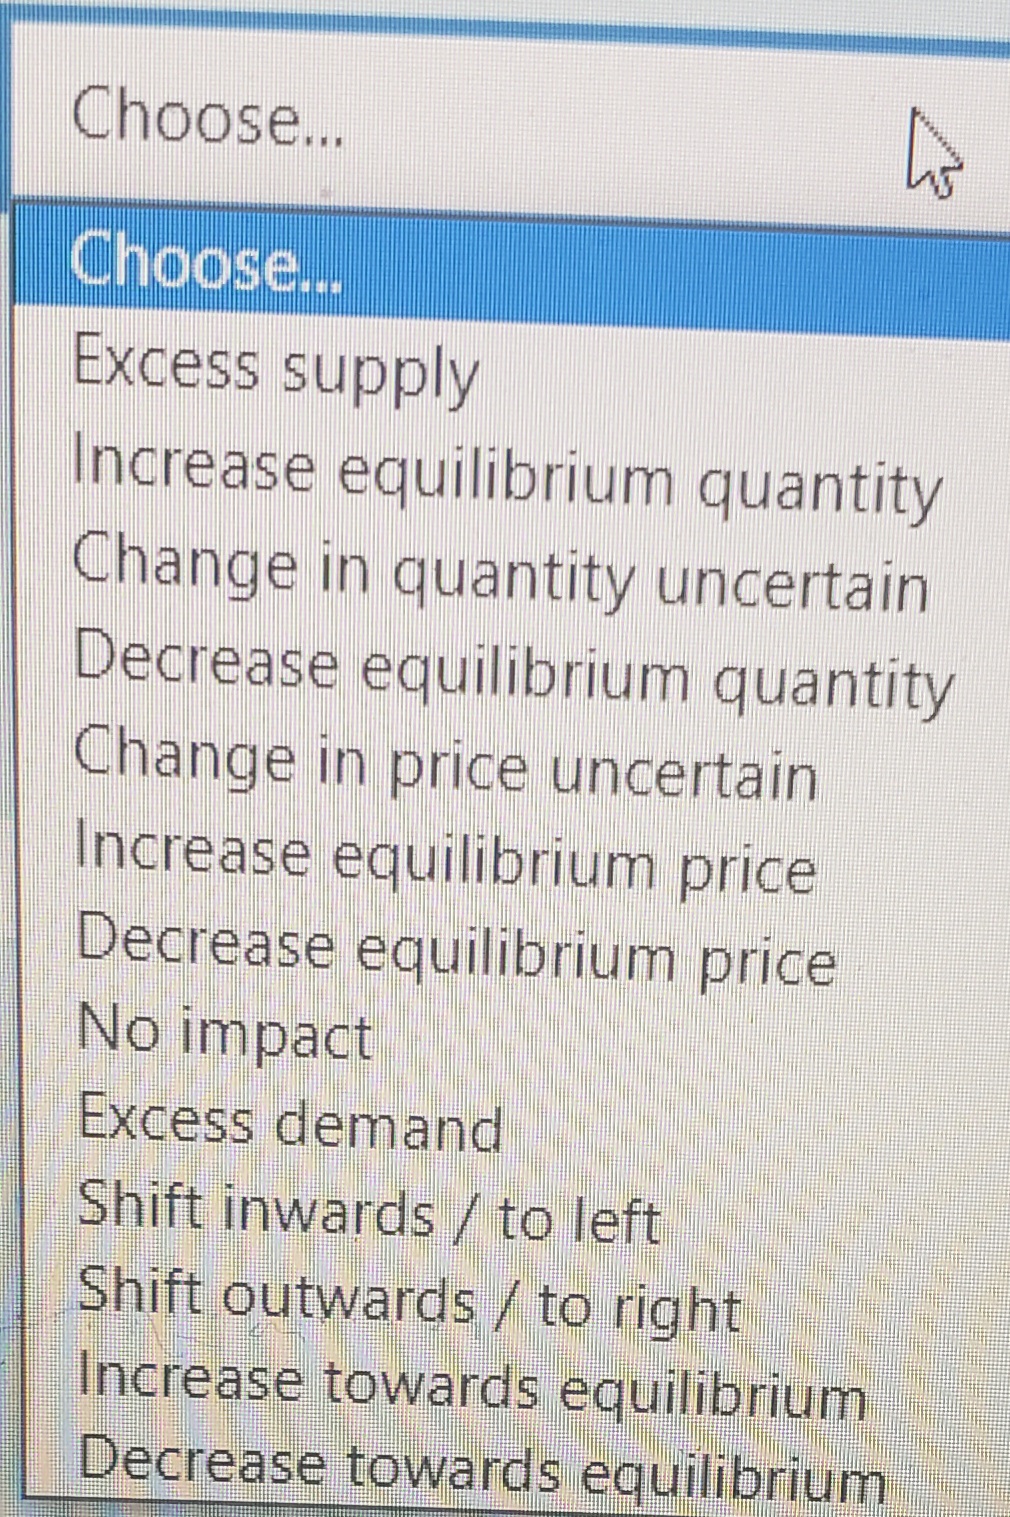 Choose...
Choose...
Excess supply
Increase equilibrium quantity
Change in quantity uncertain
Decrease equilibrium quantity
Change in price uncertain
Increase equilibrium price
Decrease equilibrium price
No impact
Excess demand
Shift inwards / to left
Shift outwards / to right
Increase towards equilibrium
Decrease towards equilibrium